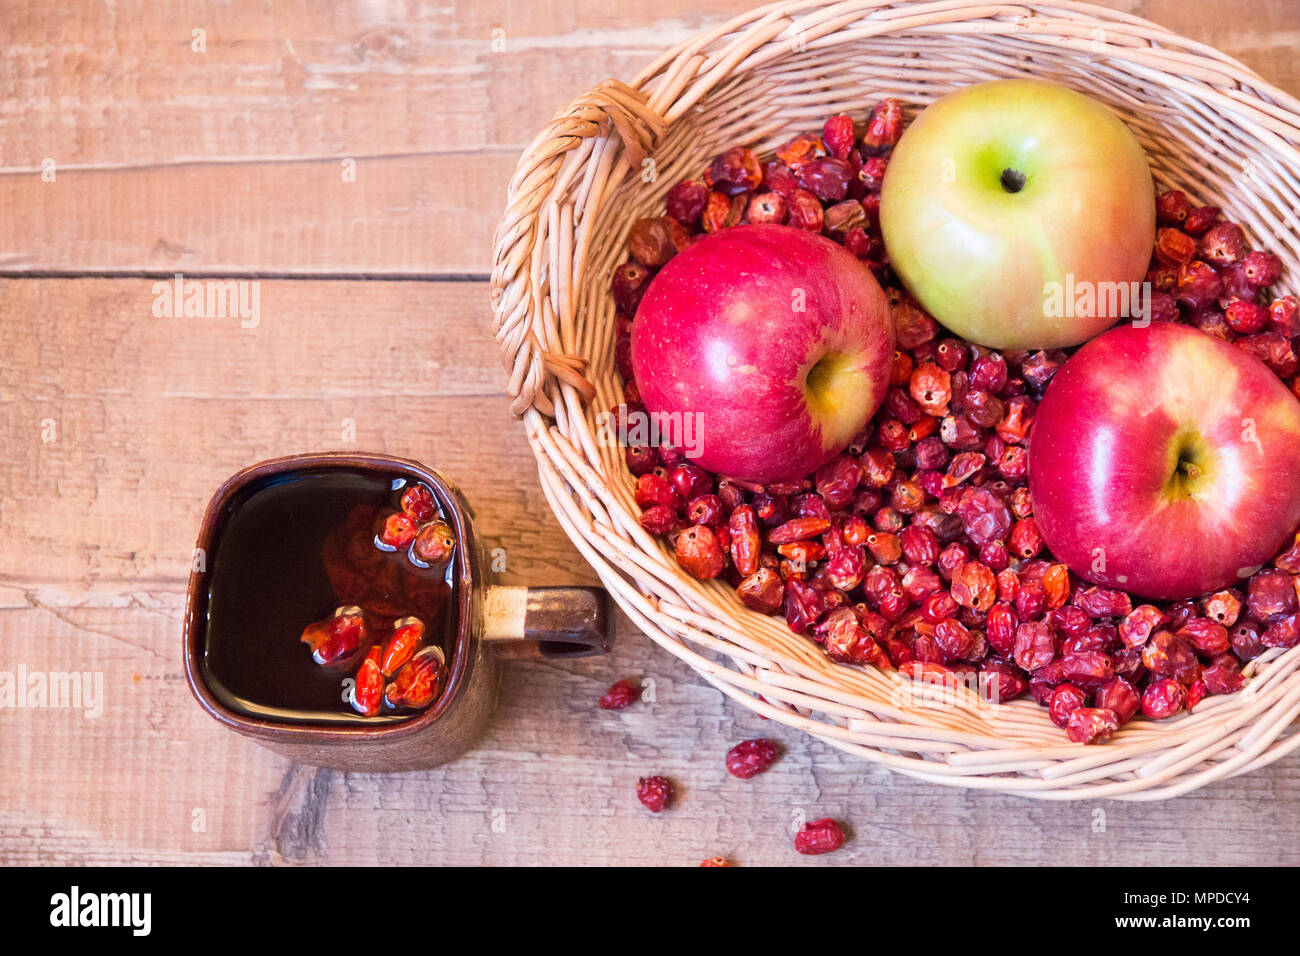 Mug Of Black Tea Rosehip Next To Wicker Basket Filled With Dried Wild Rose And Apples On Wooden Surface Stock Photo Alamy